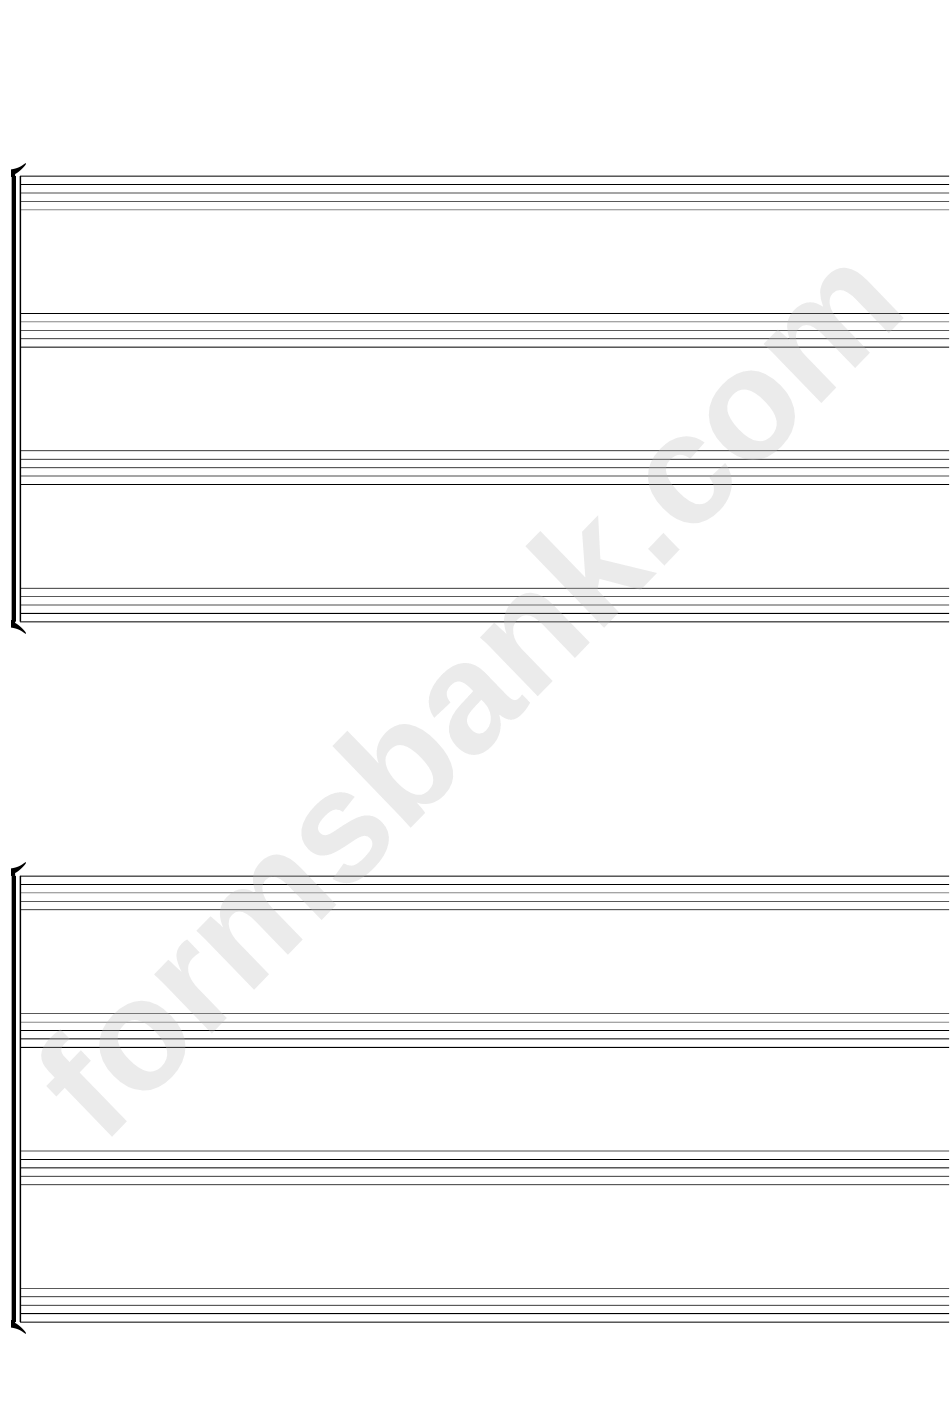 2-Stave, Quartet Format (Space For Text), Blank Clefs (A4 Portrait) Blank Sheet Music